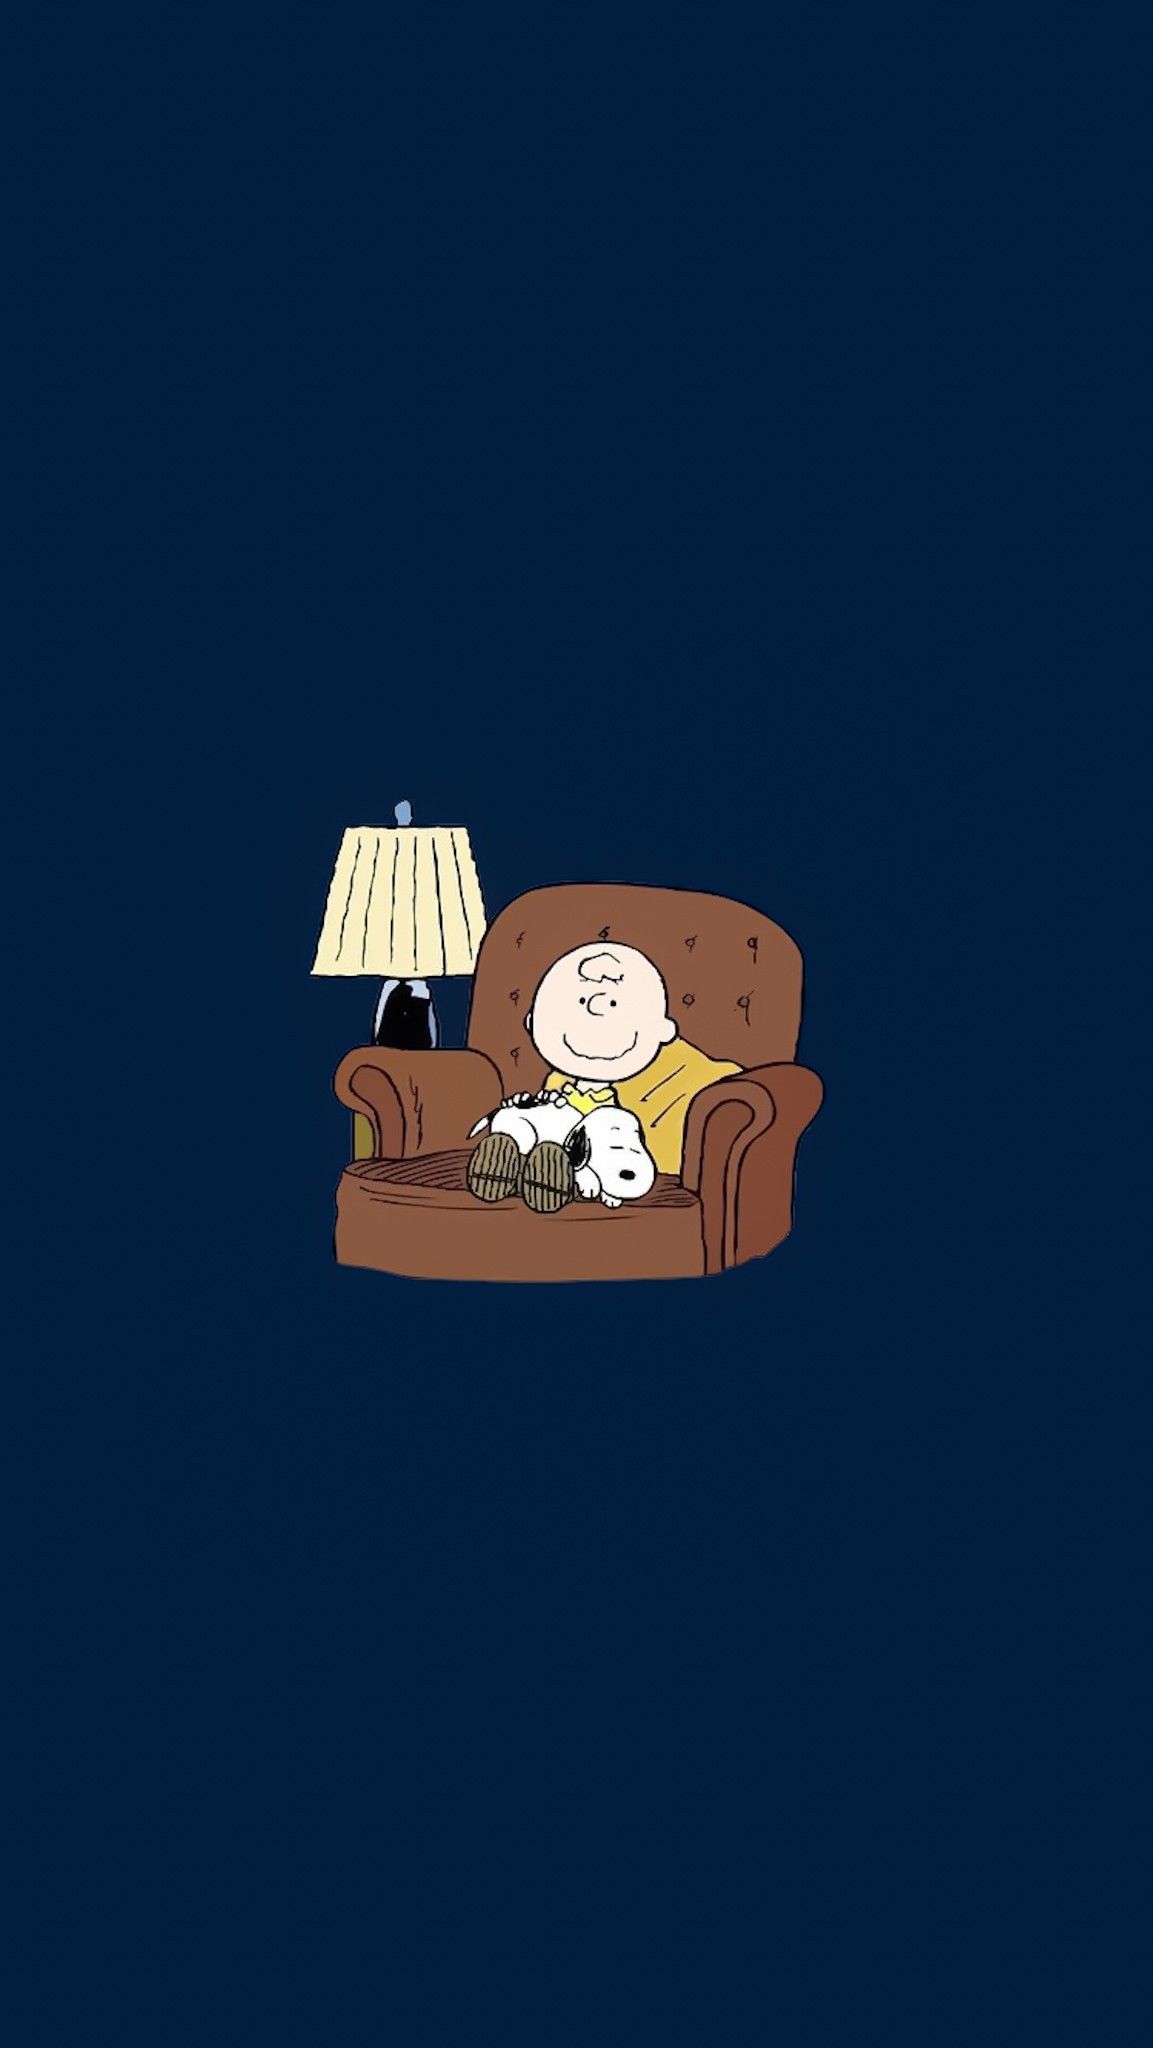 Snoopy. Charlie brown wallpaper, Snoopy, Snoopy wallpaper